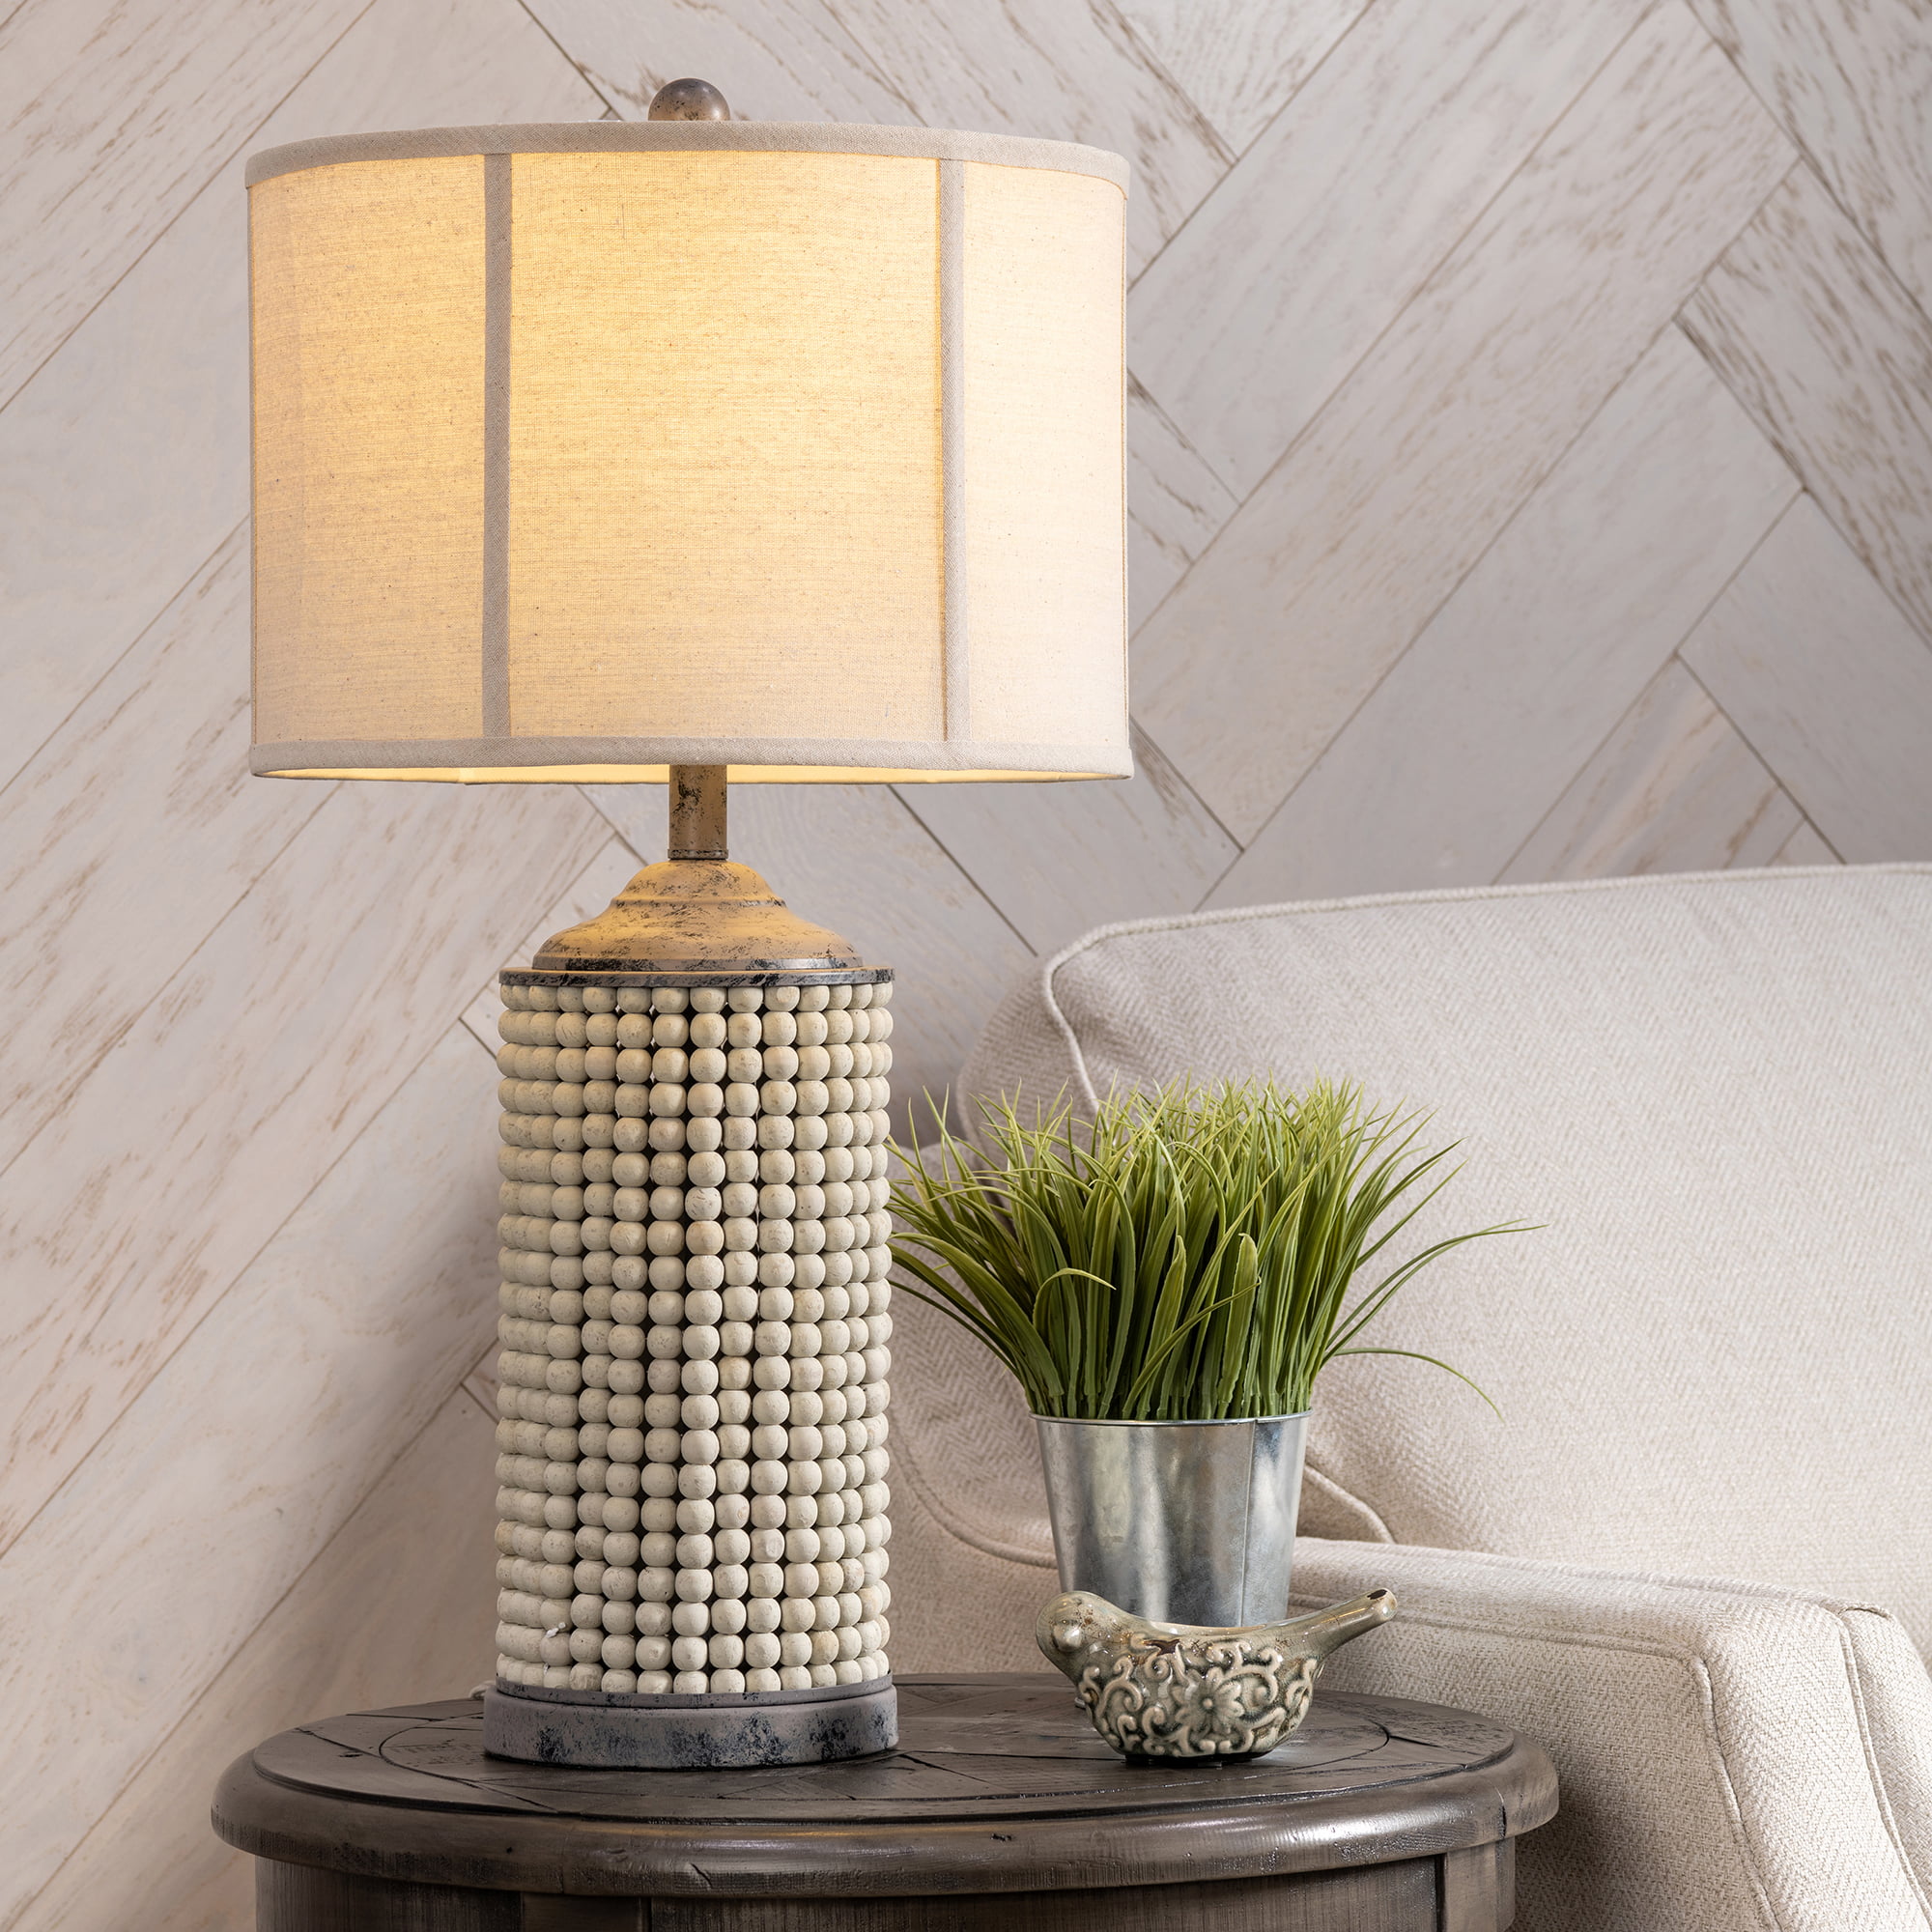 28 5 Th Beaded Table Lamp Com, Wooden Bead Table Lamp